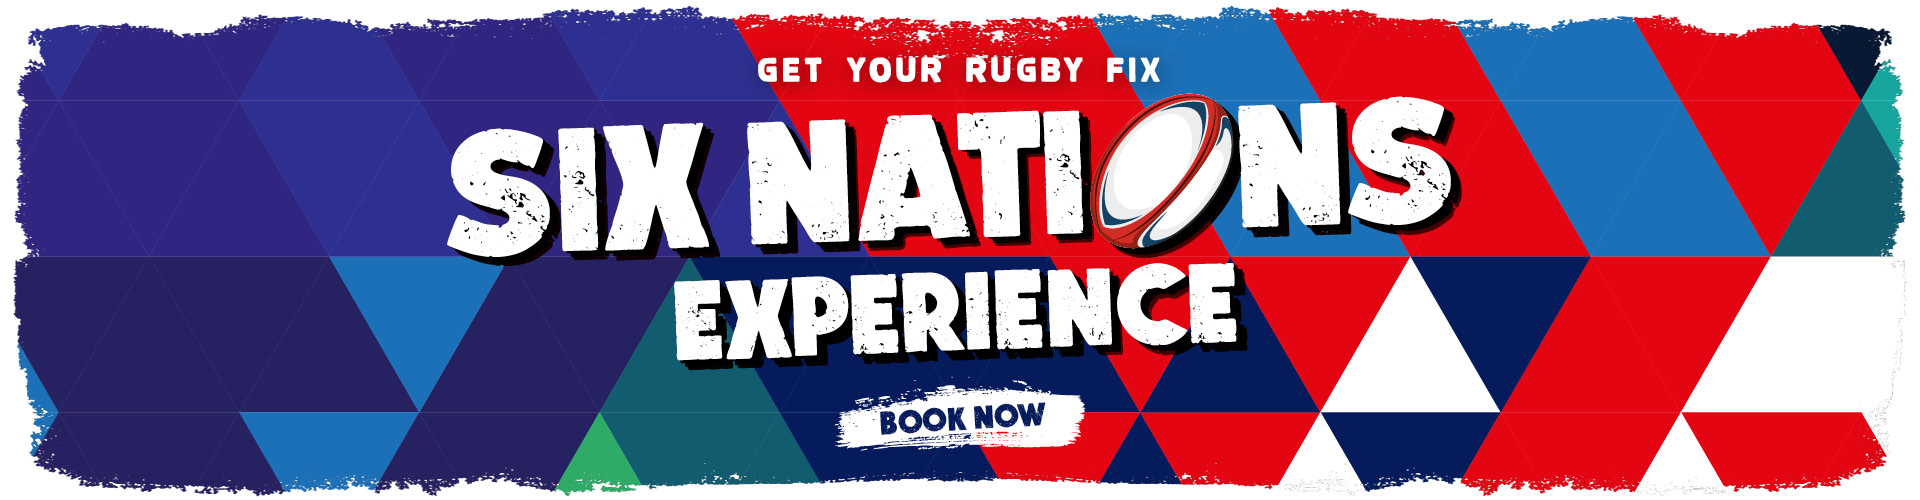 Get your rugby fix - Six Nations experience - Book no